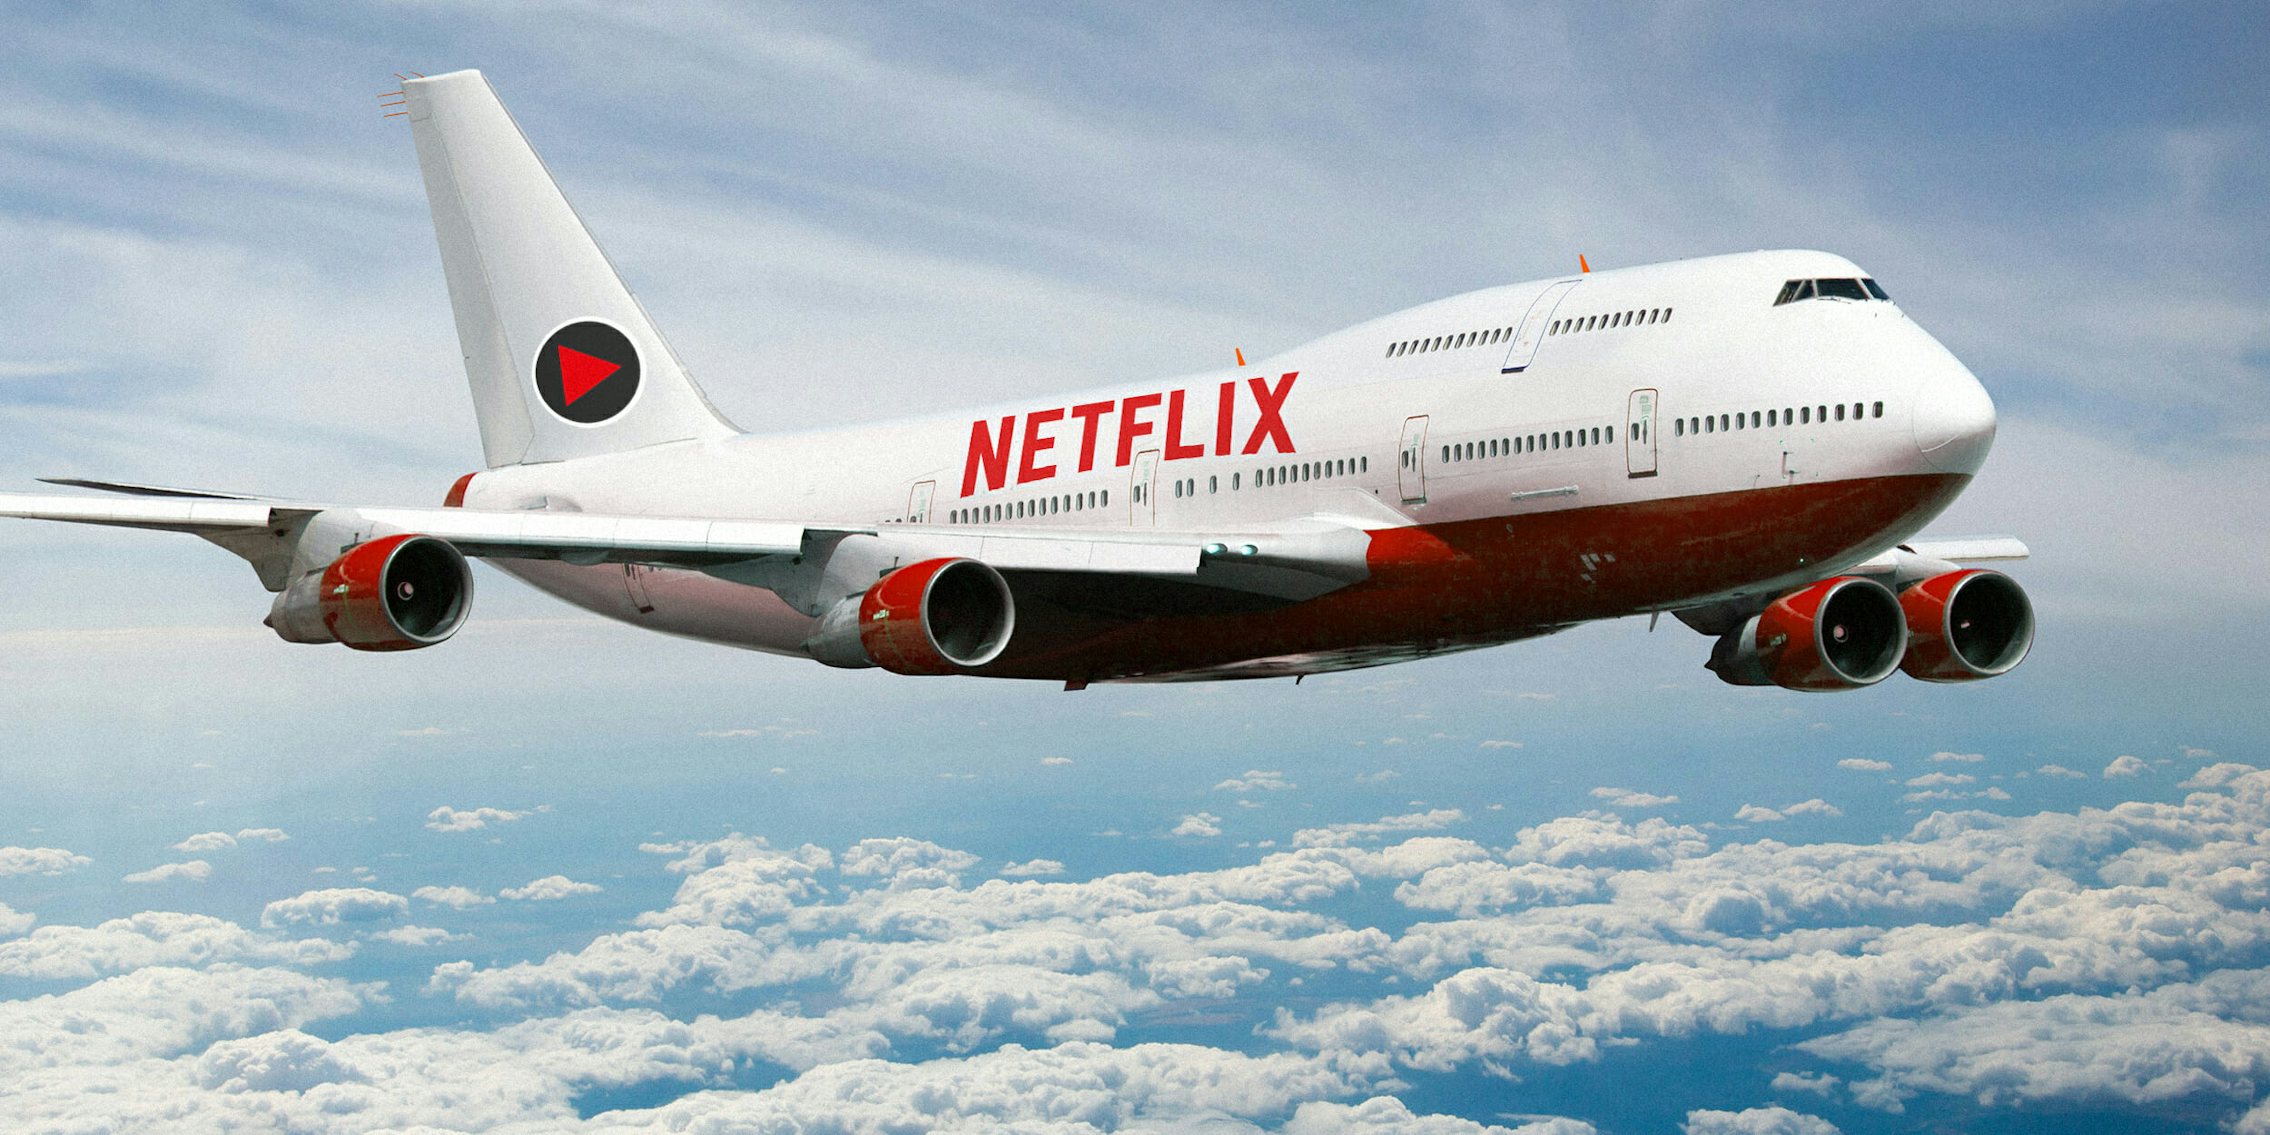 Airliner with Netflix logo and markings